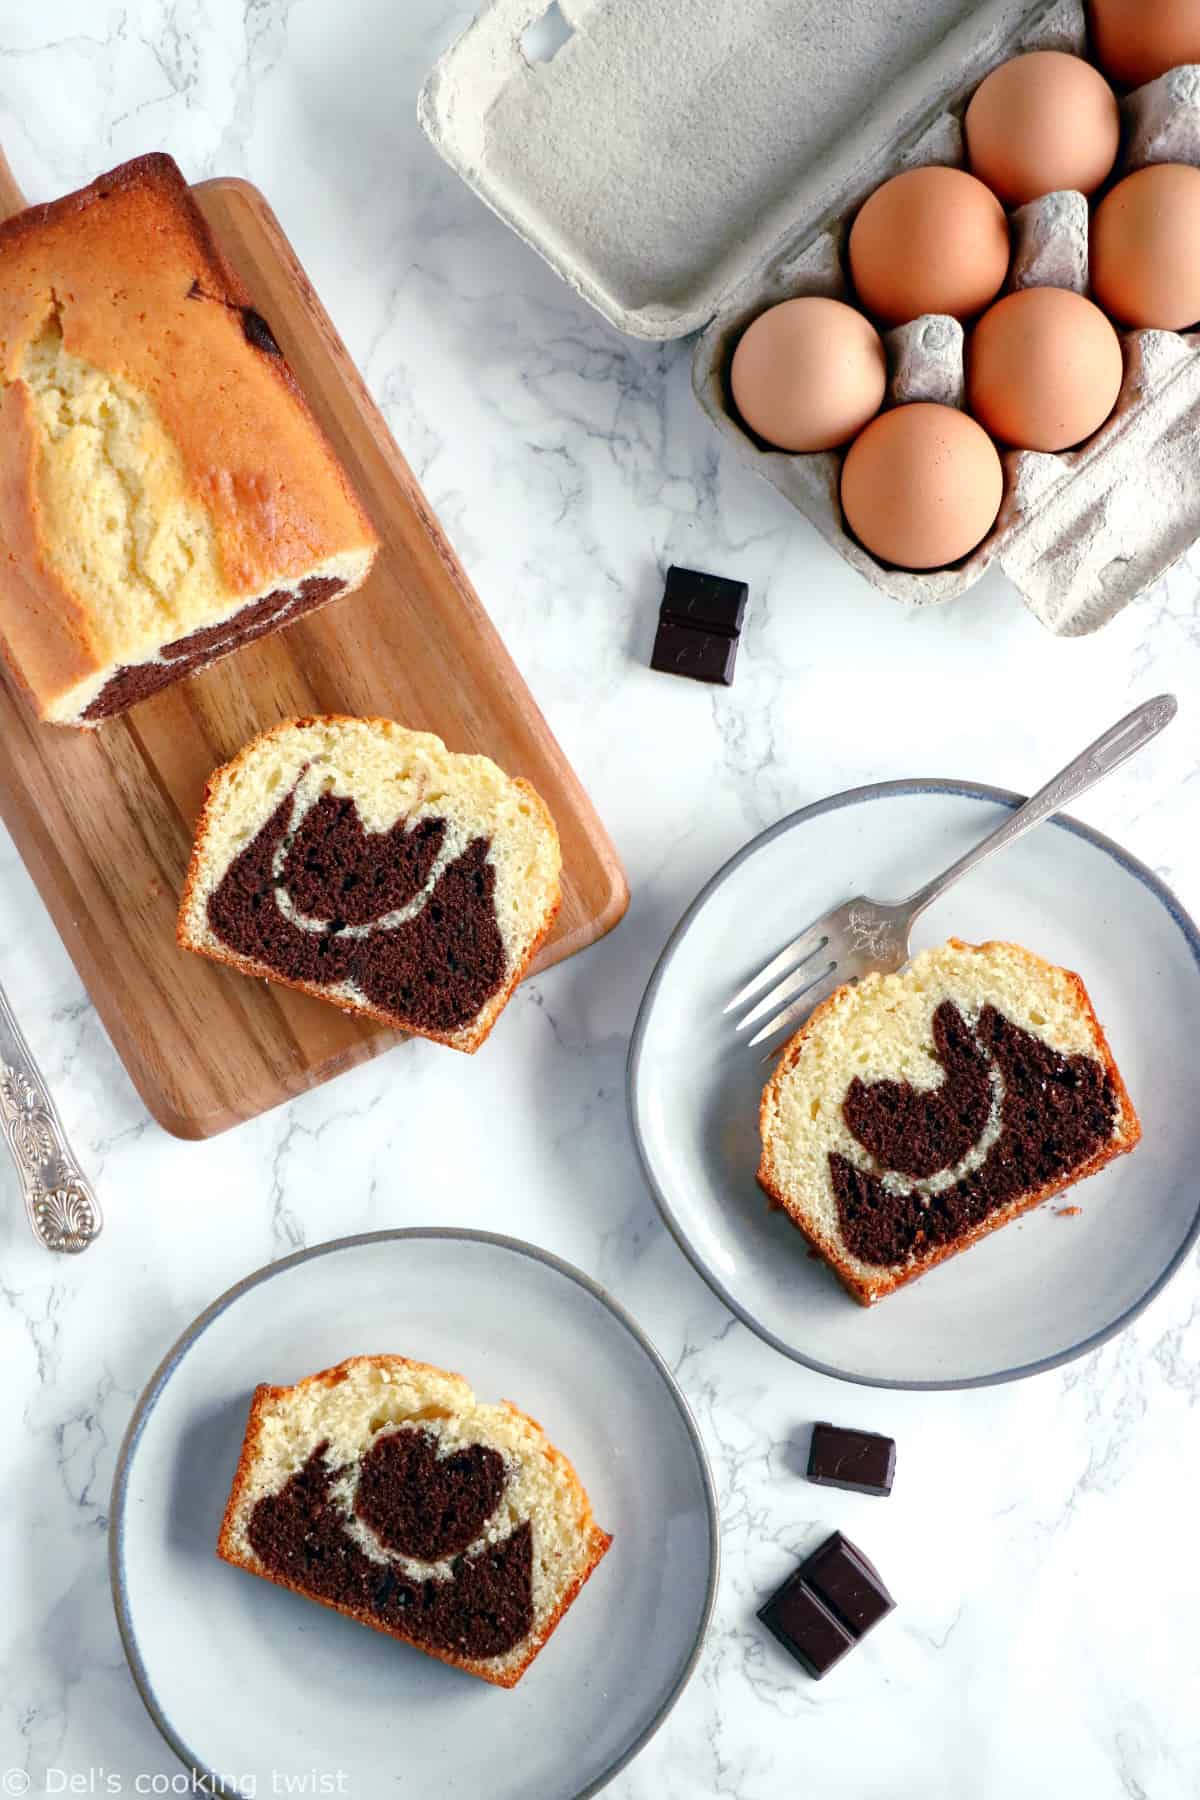 Easy Chocolate Marble Yogurt Cake has become a basic recipe in my house. It's light, fluffy, moist, delicious, and ready in no time.